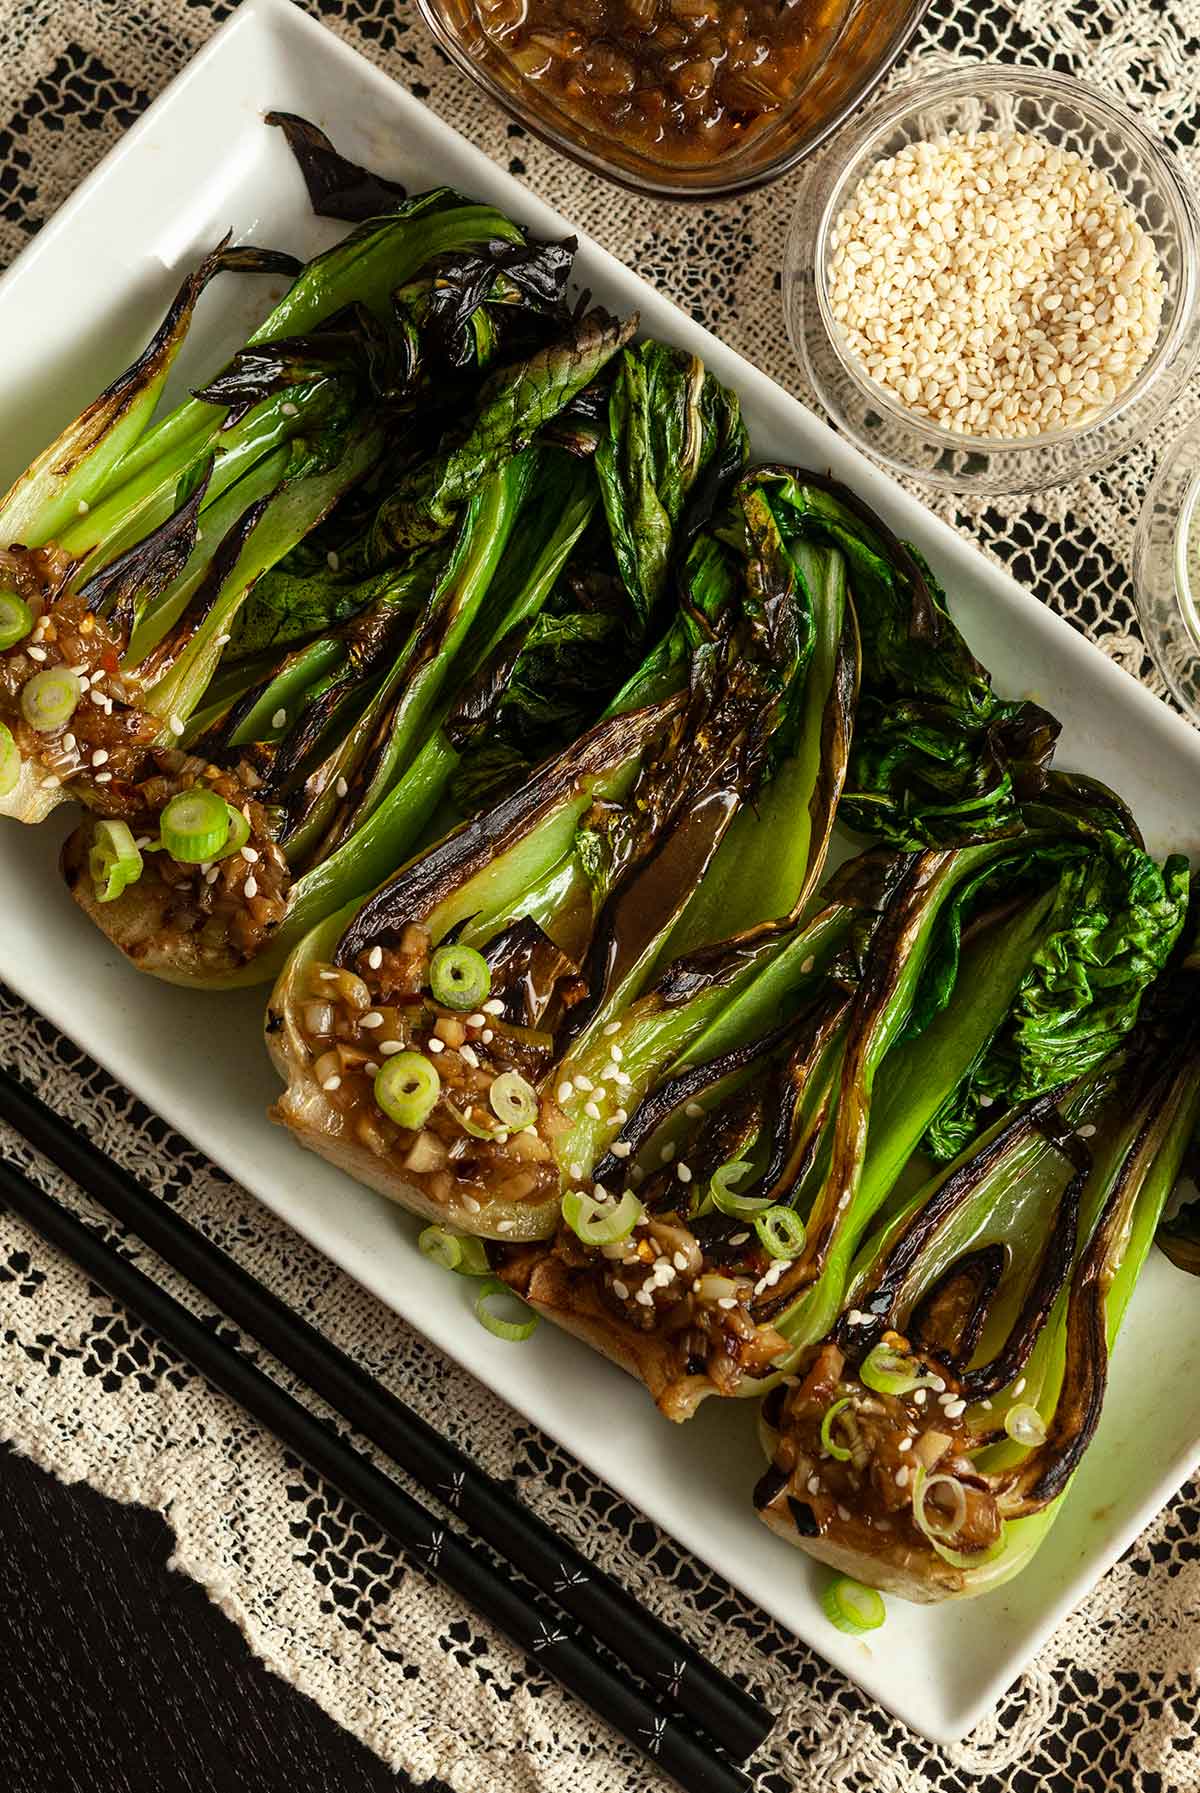 5 seared baby bok choy on a plate beside chop sticks, a bowl of sesame seeds and sauce on a lace table cloth.